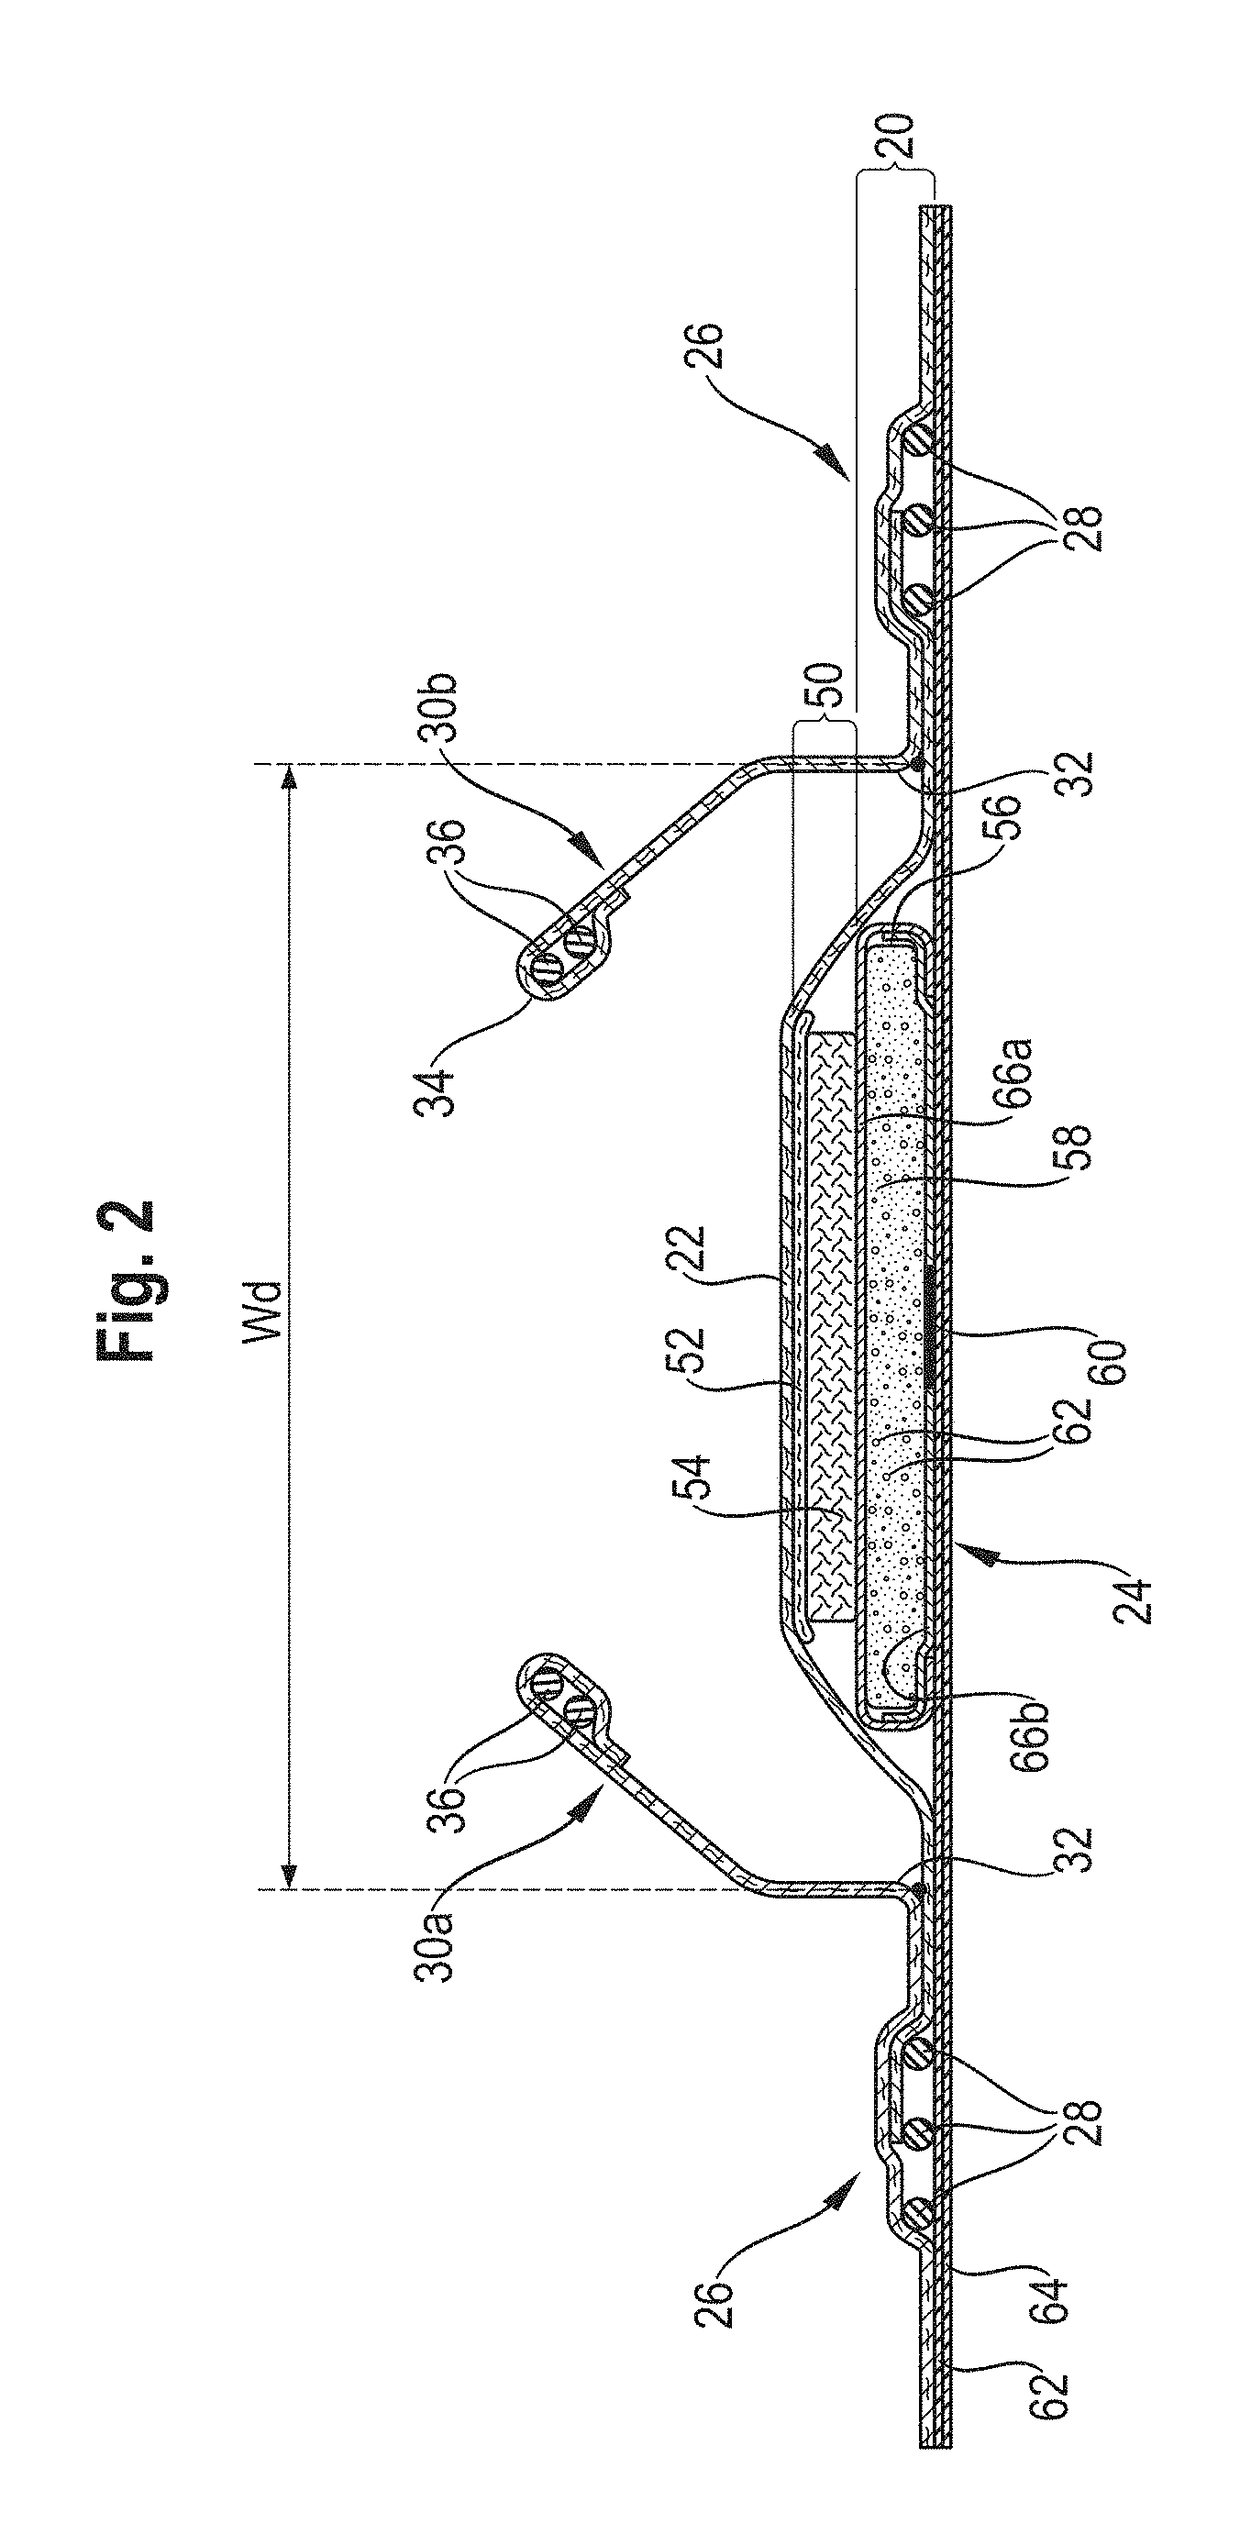 Absorbent Article With Sensor